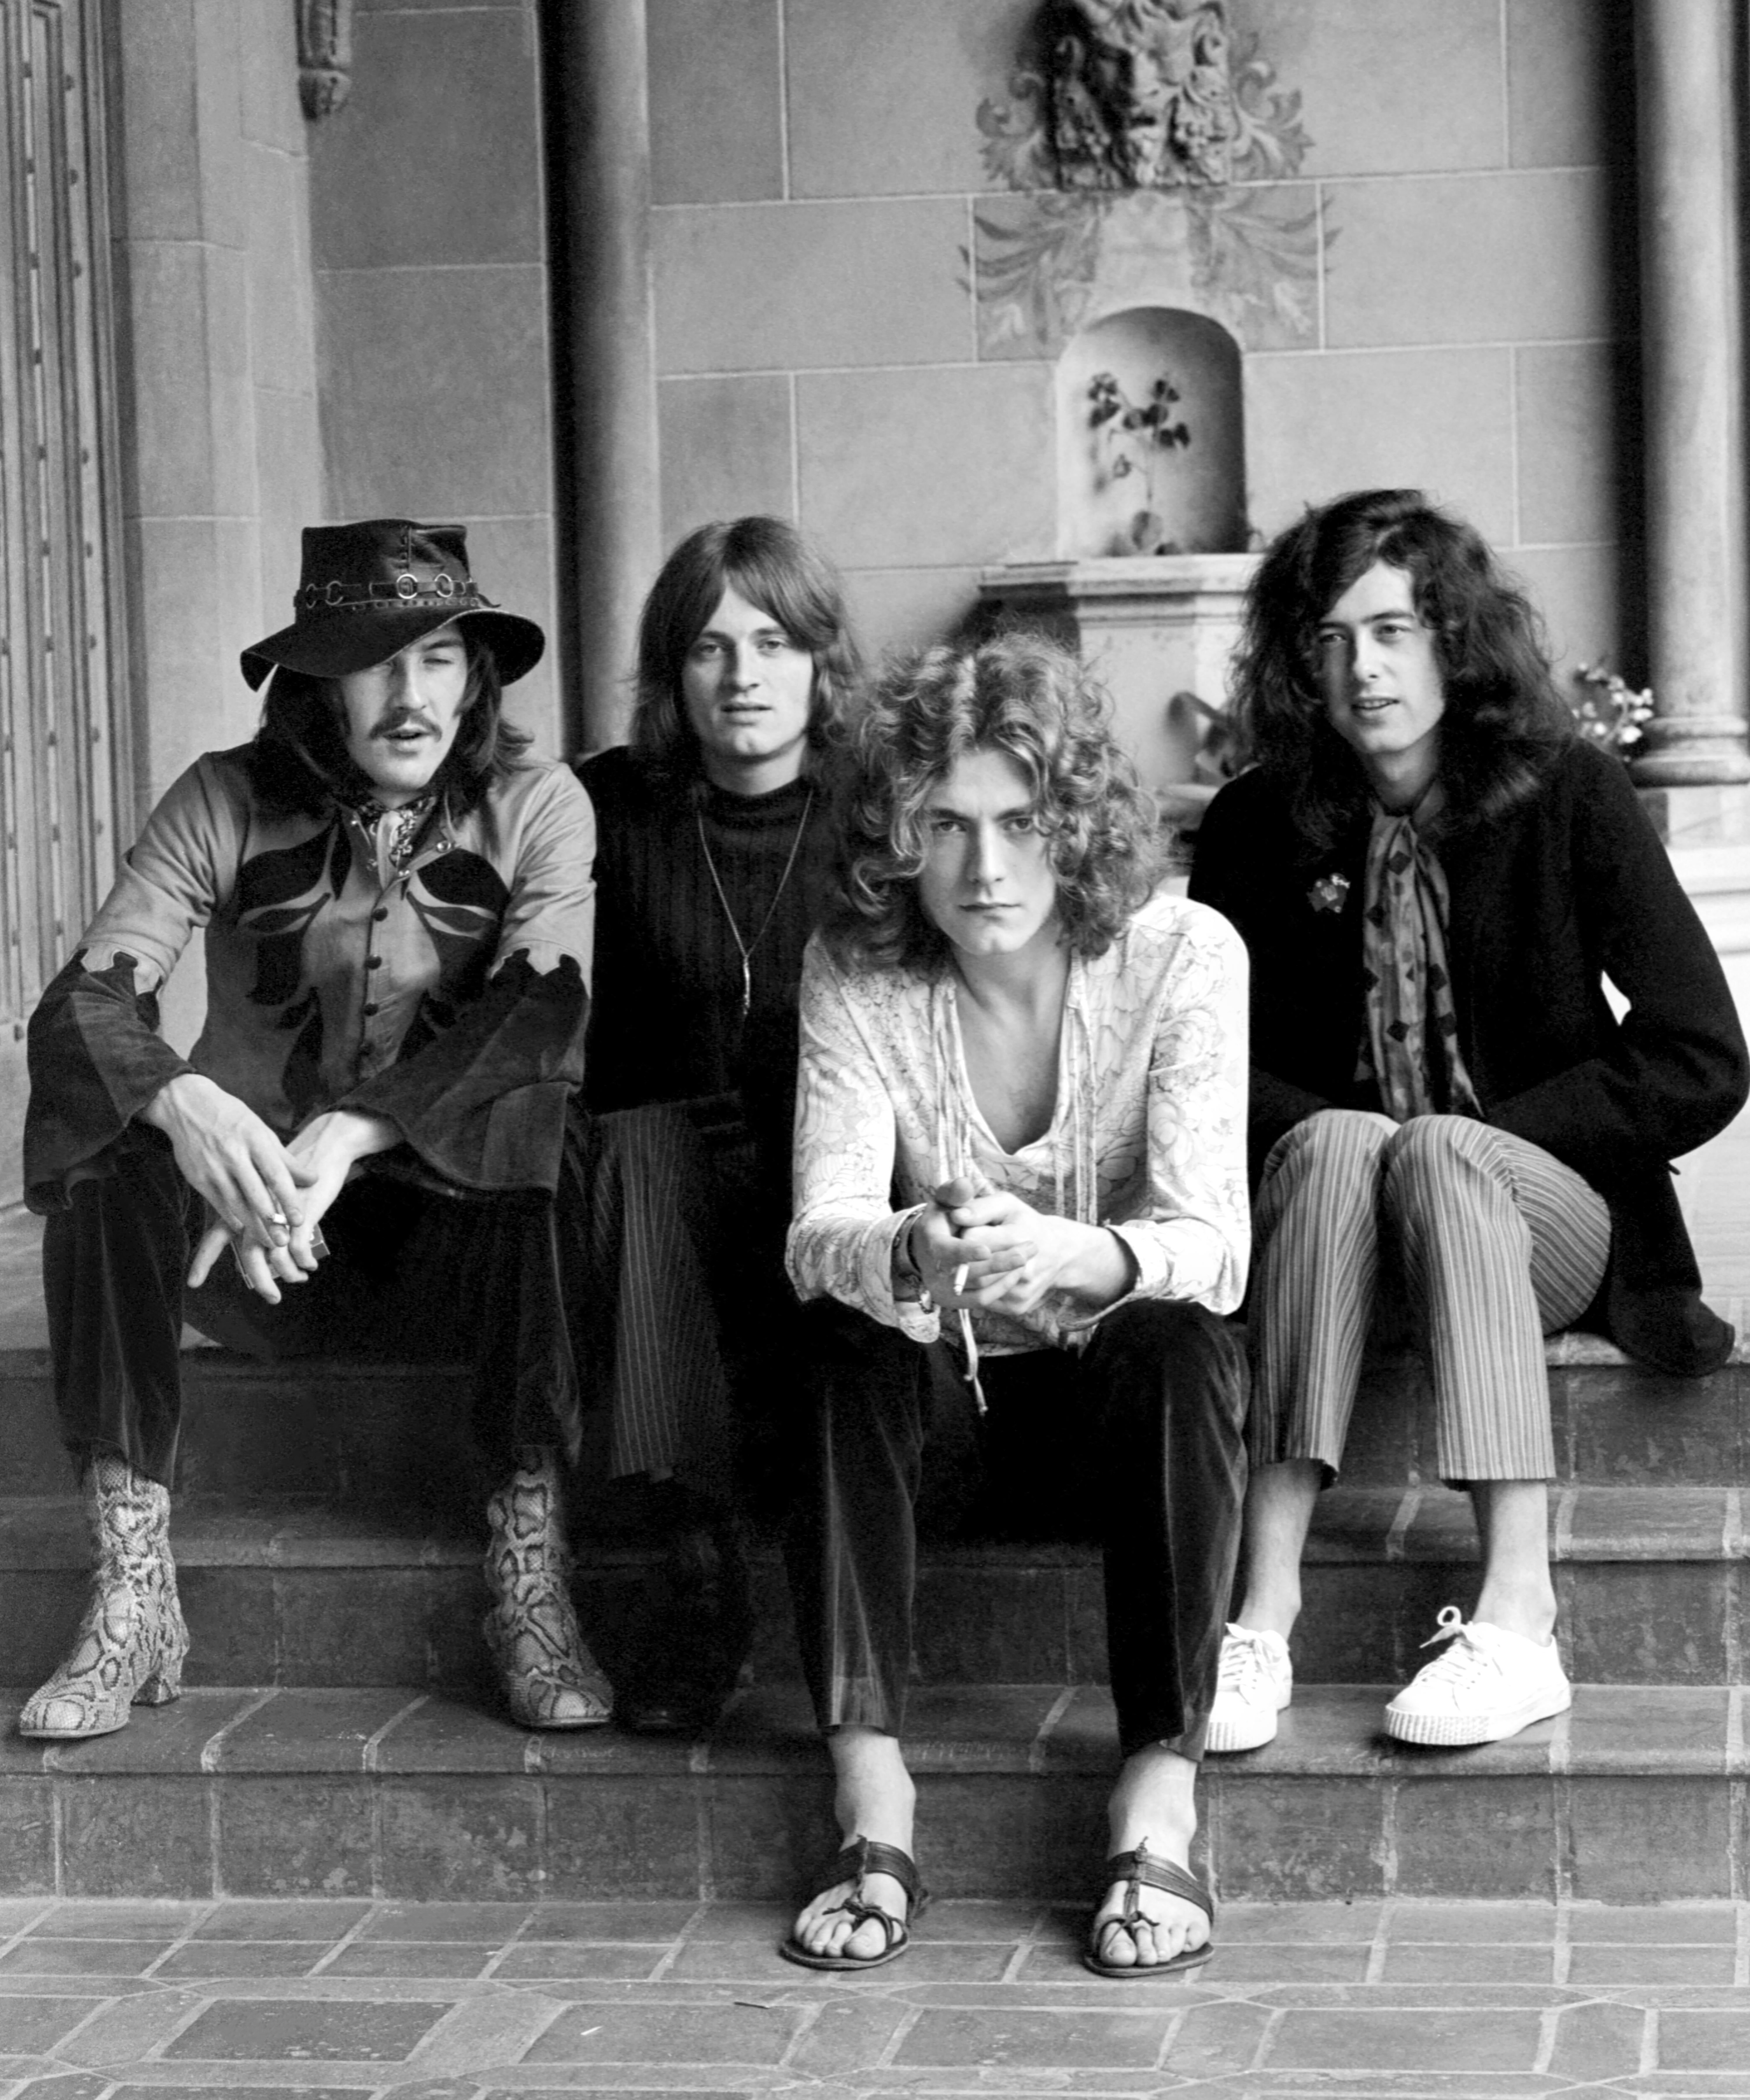 Jay Thompson Portrait Photograph - Led Zeppelin at Hollywood's Chateau Marmont